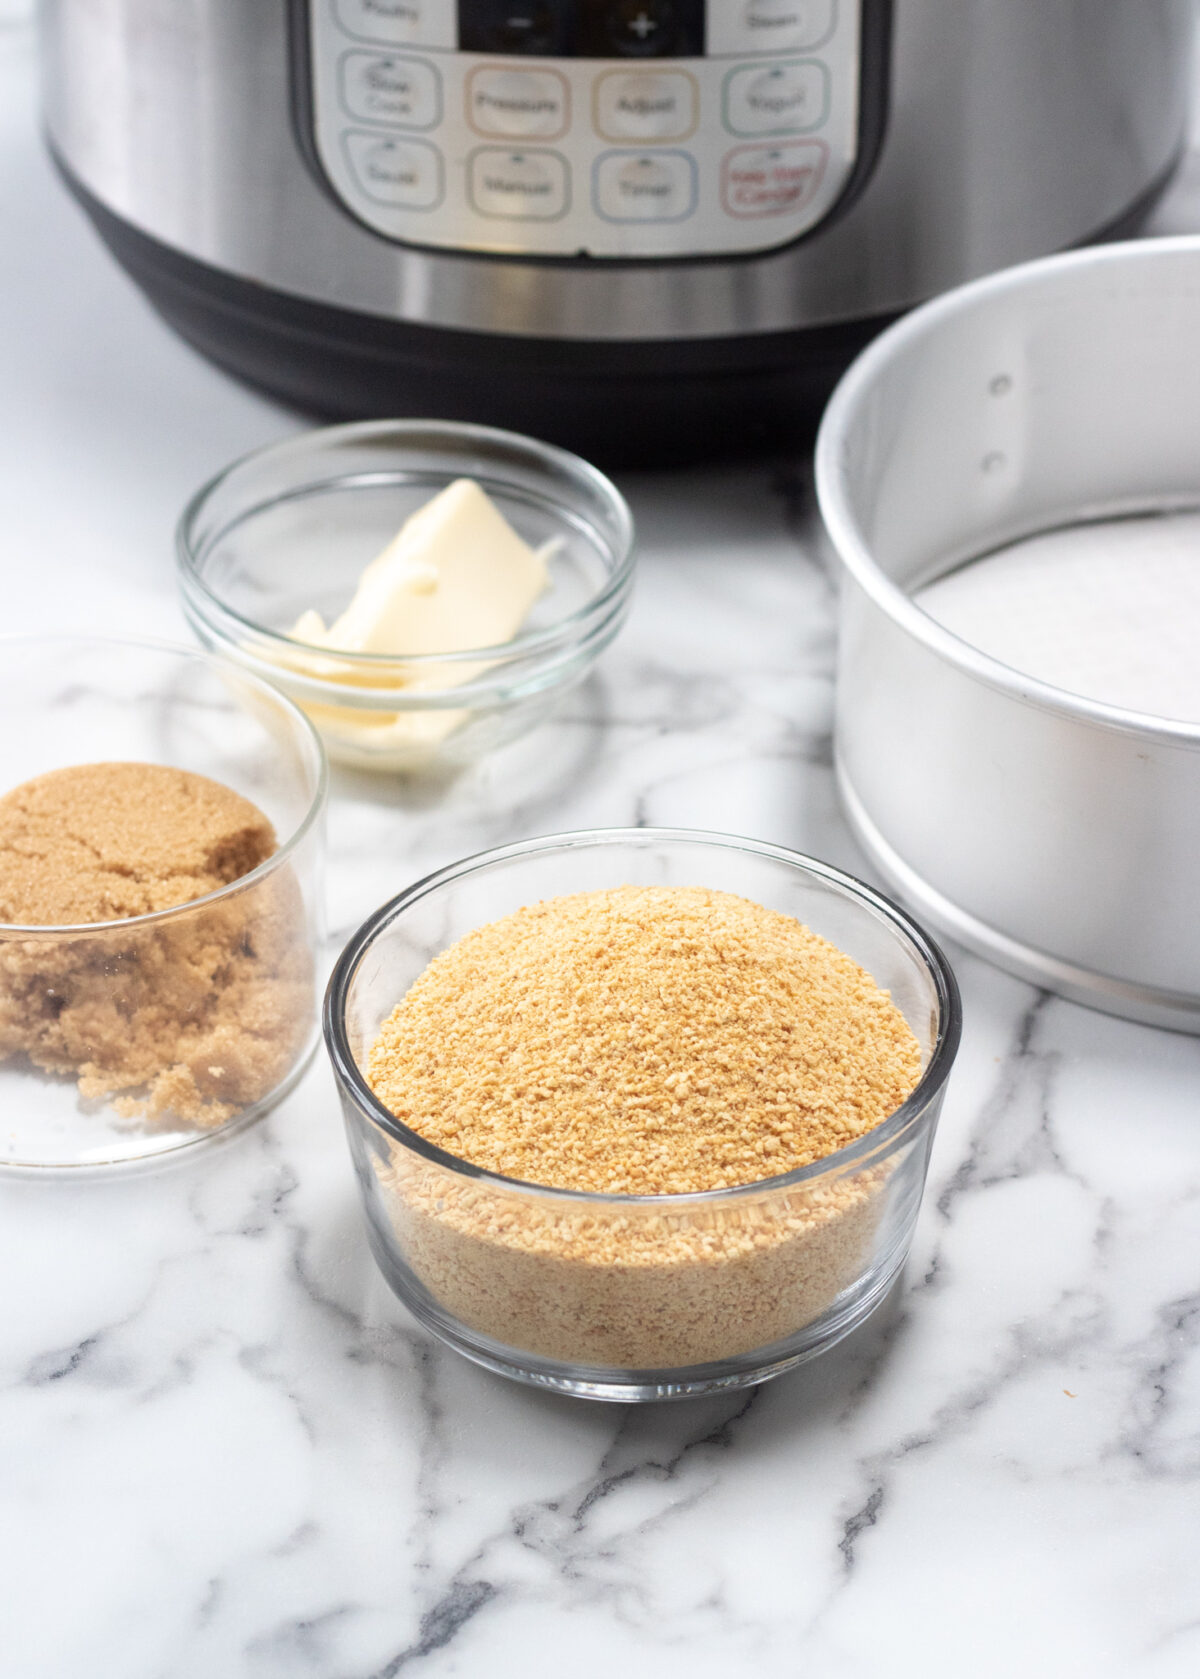 Ingredients for Cheesecake Crust